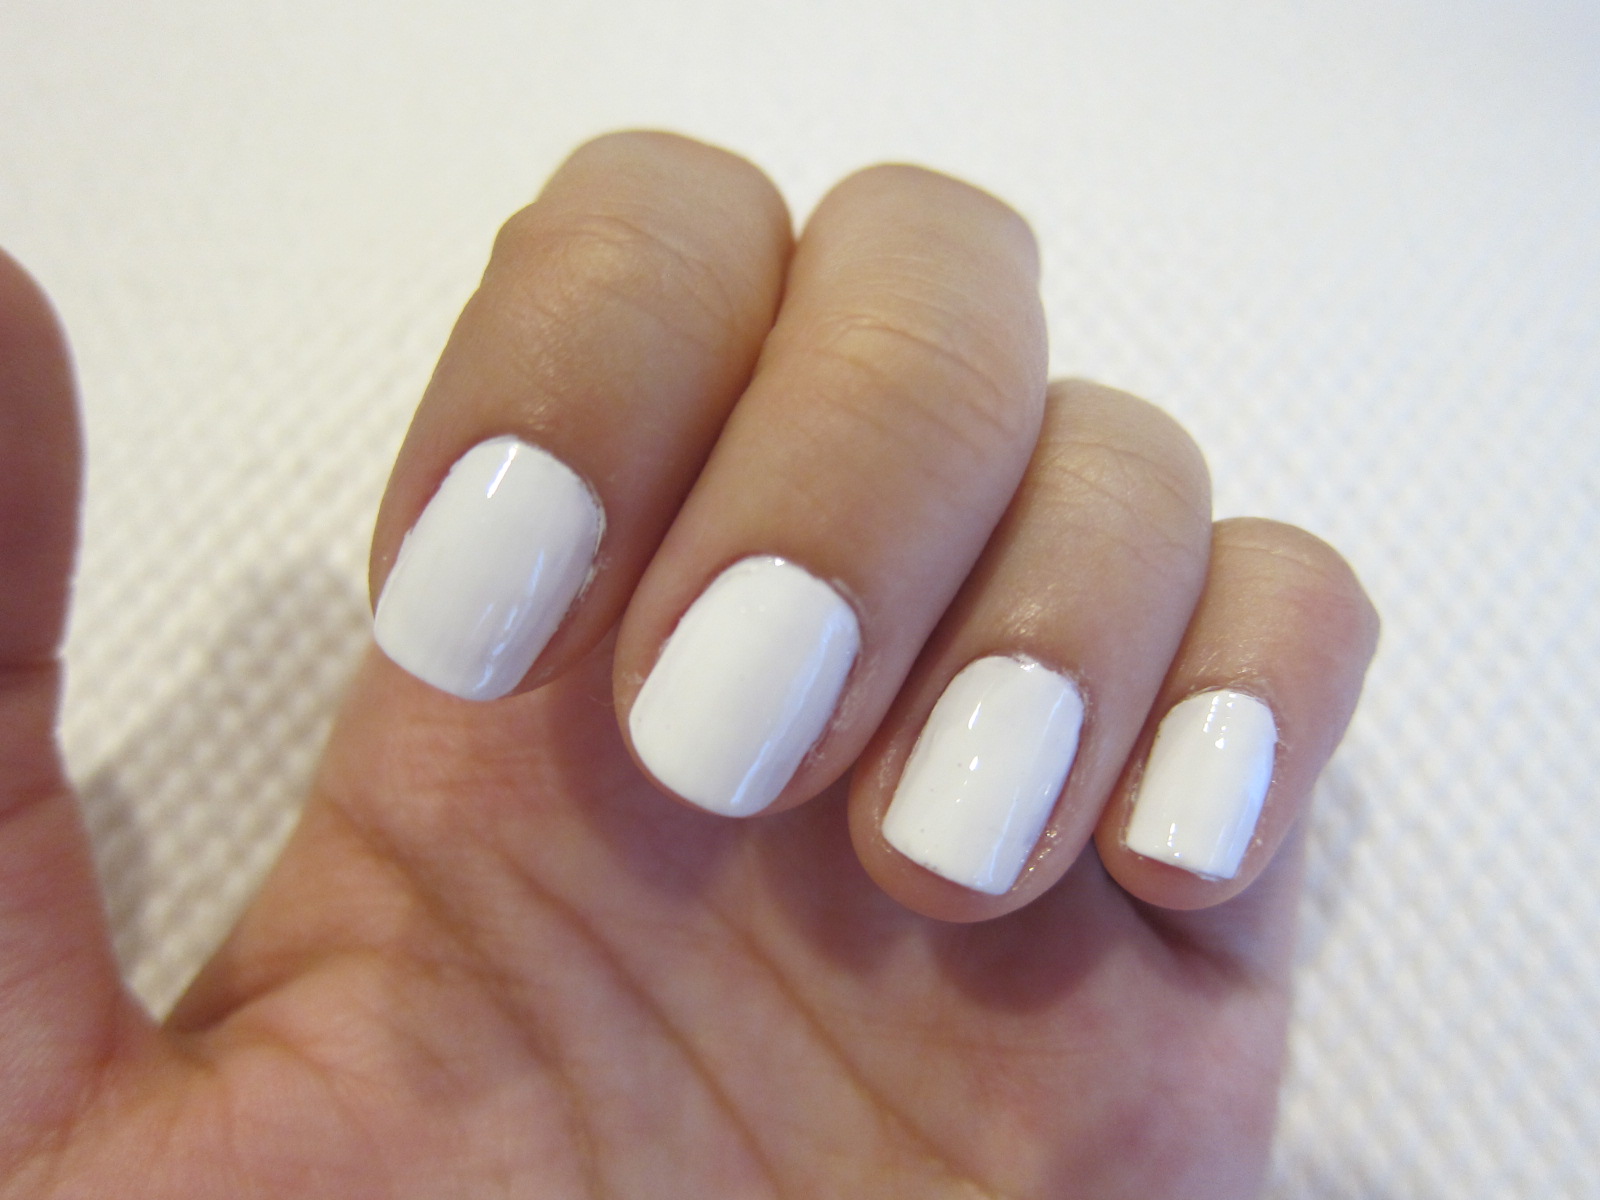 7. Orly Nail Lacquer in "White Tips" - wide 5